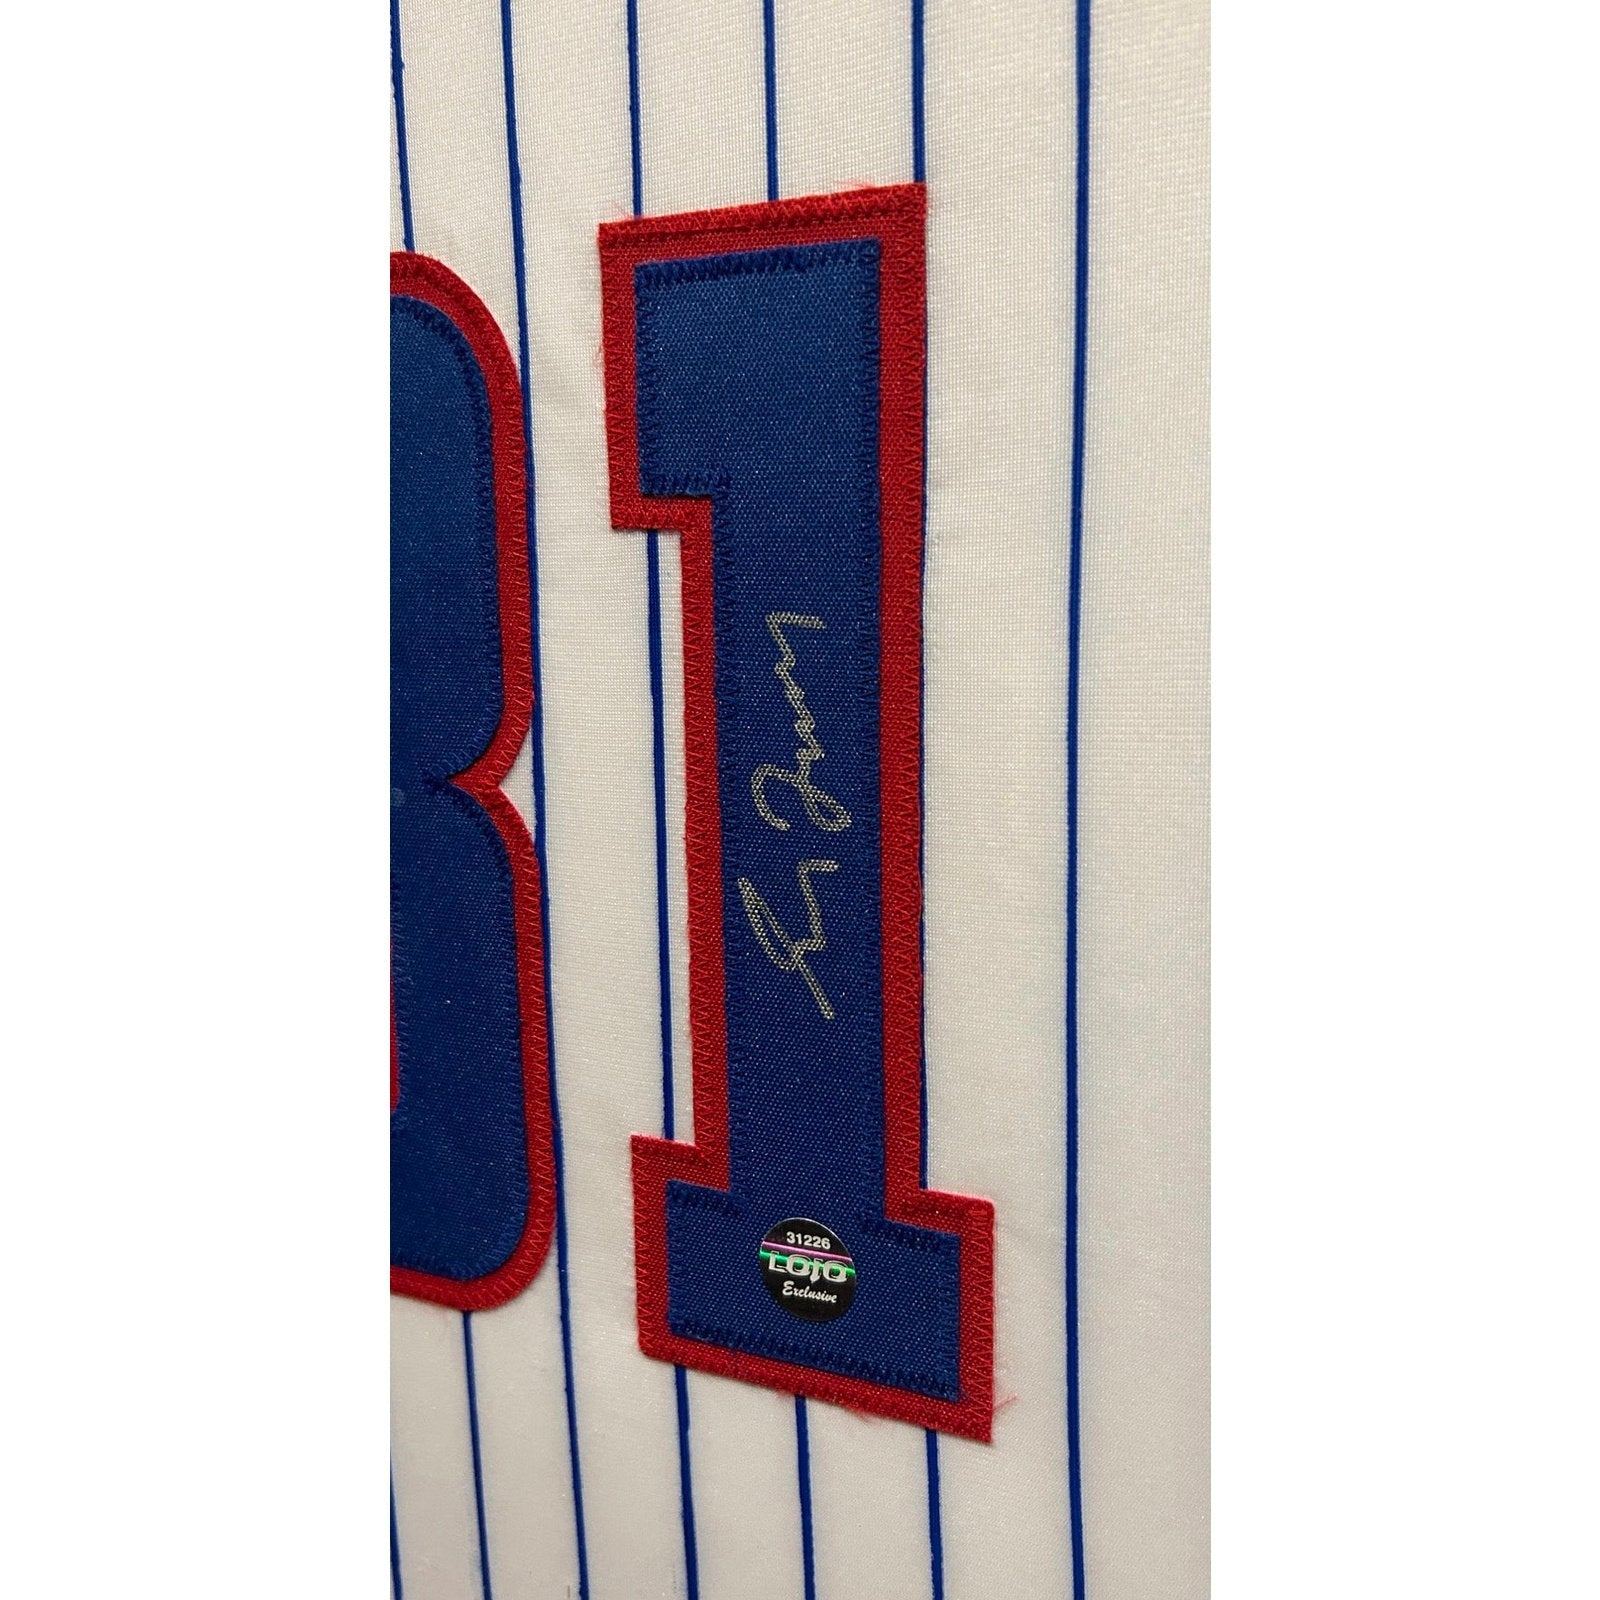 Greg Maddux Signed Autographed Chicago Cubs Baseball Jersey